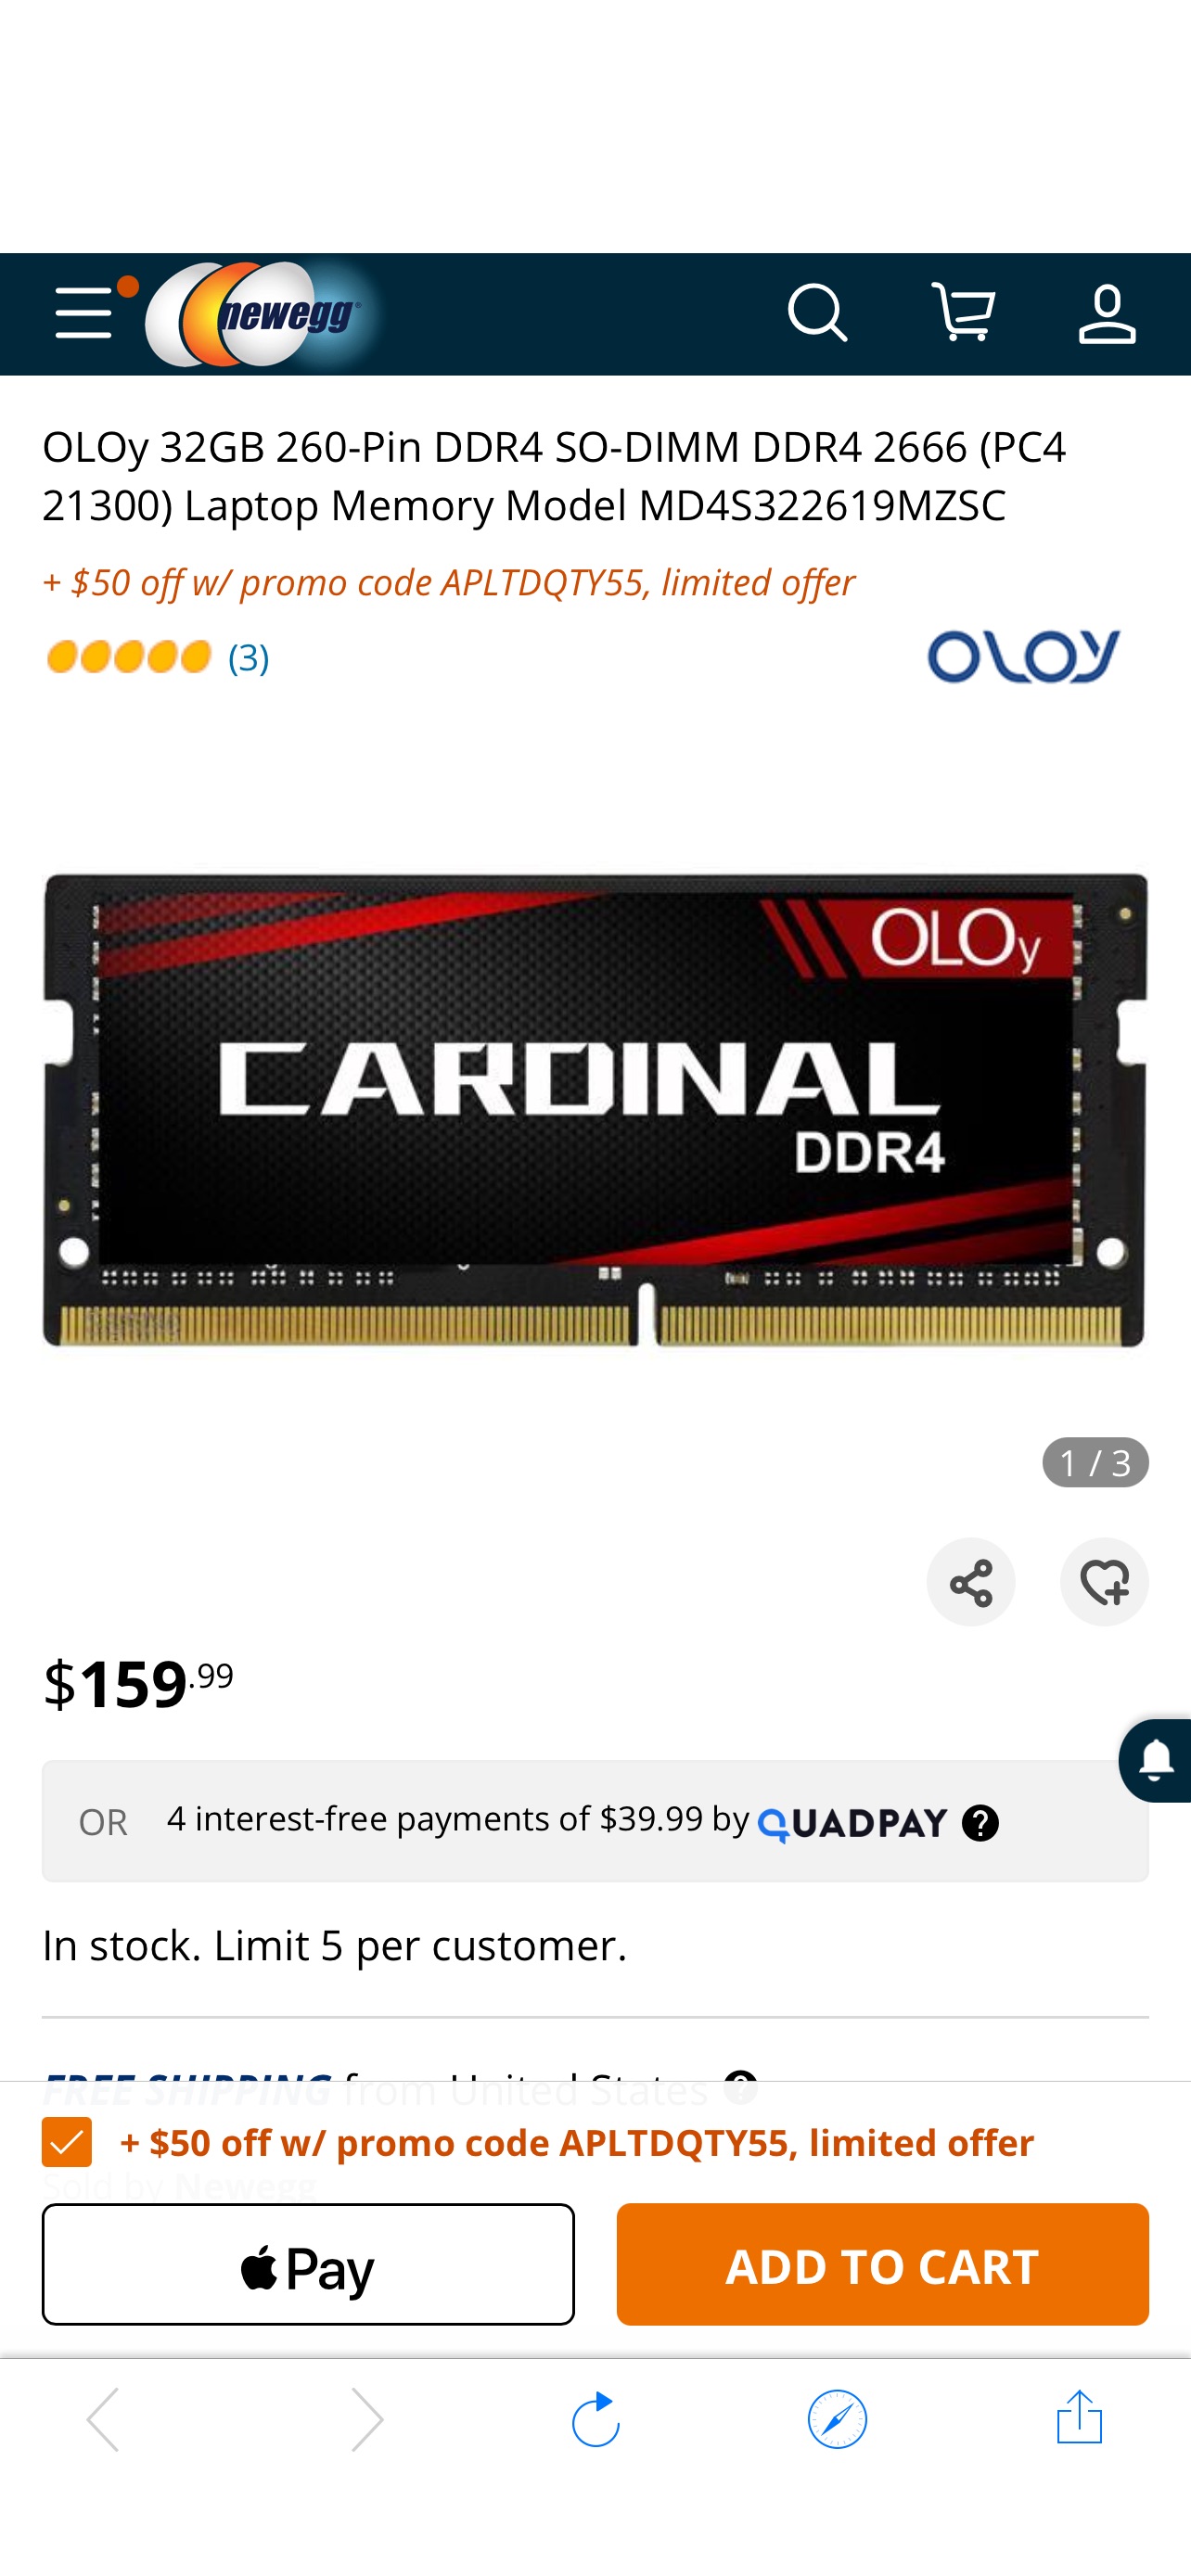 OLOy 32GB 260-Pin DDR4 SO-DIMM DDR4 2666 (PC4 21300) Laptop Memory Model MD4S322619MZSC Laptop 原价159， 有50的promo code，可以叠加